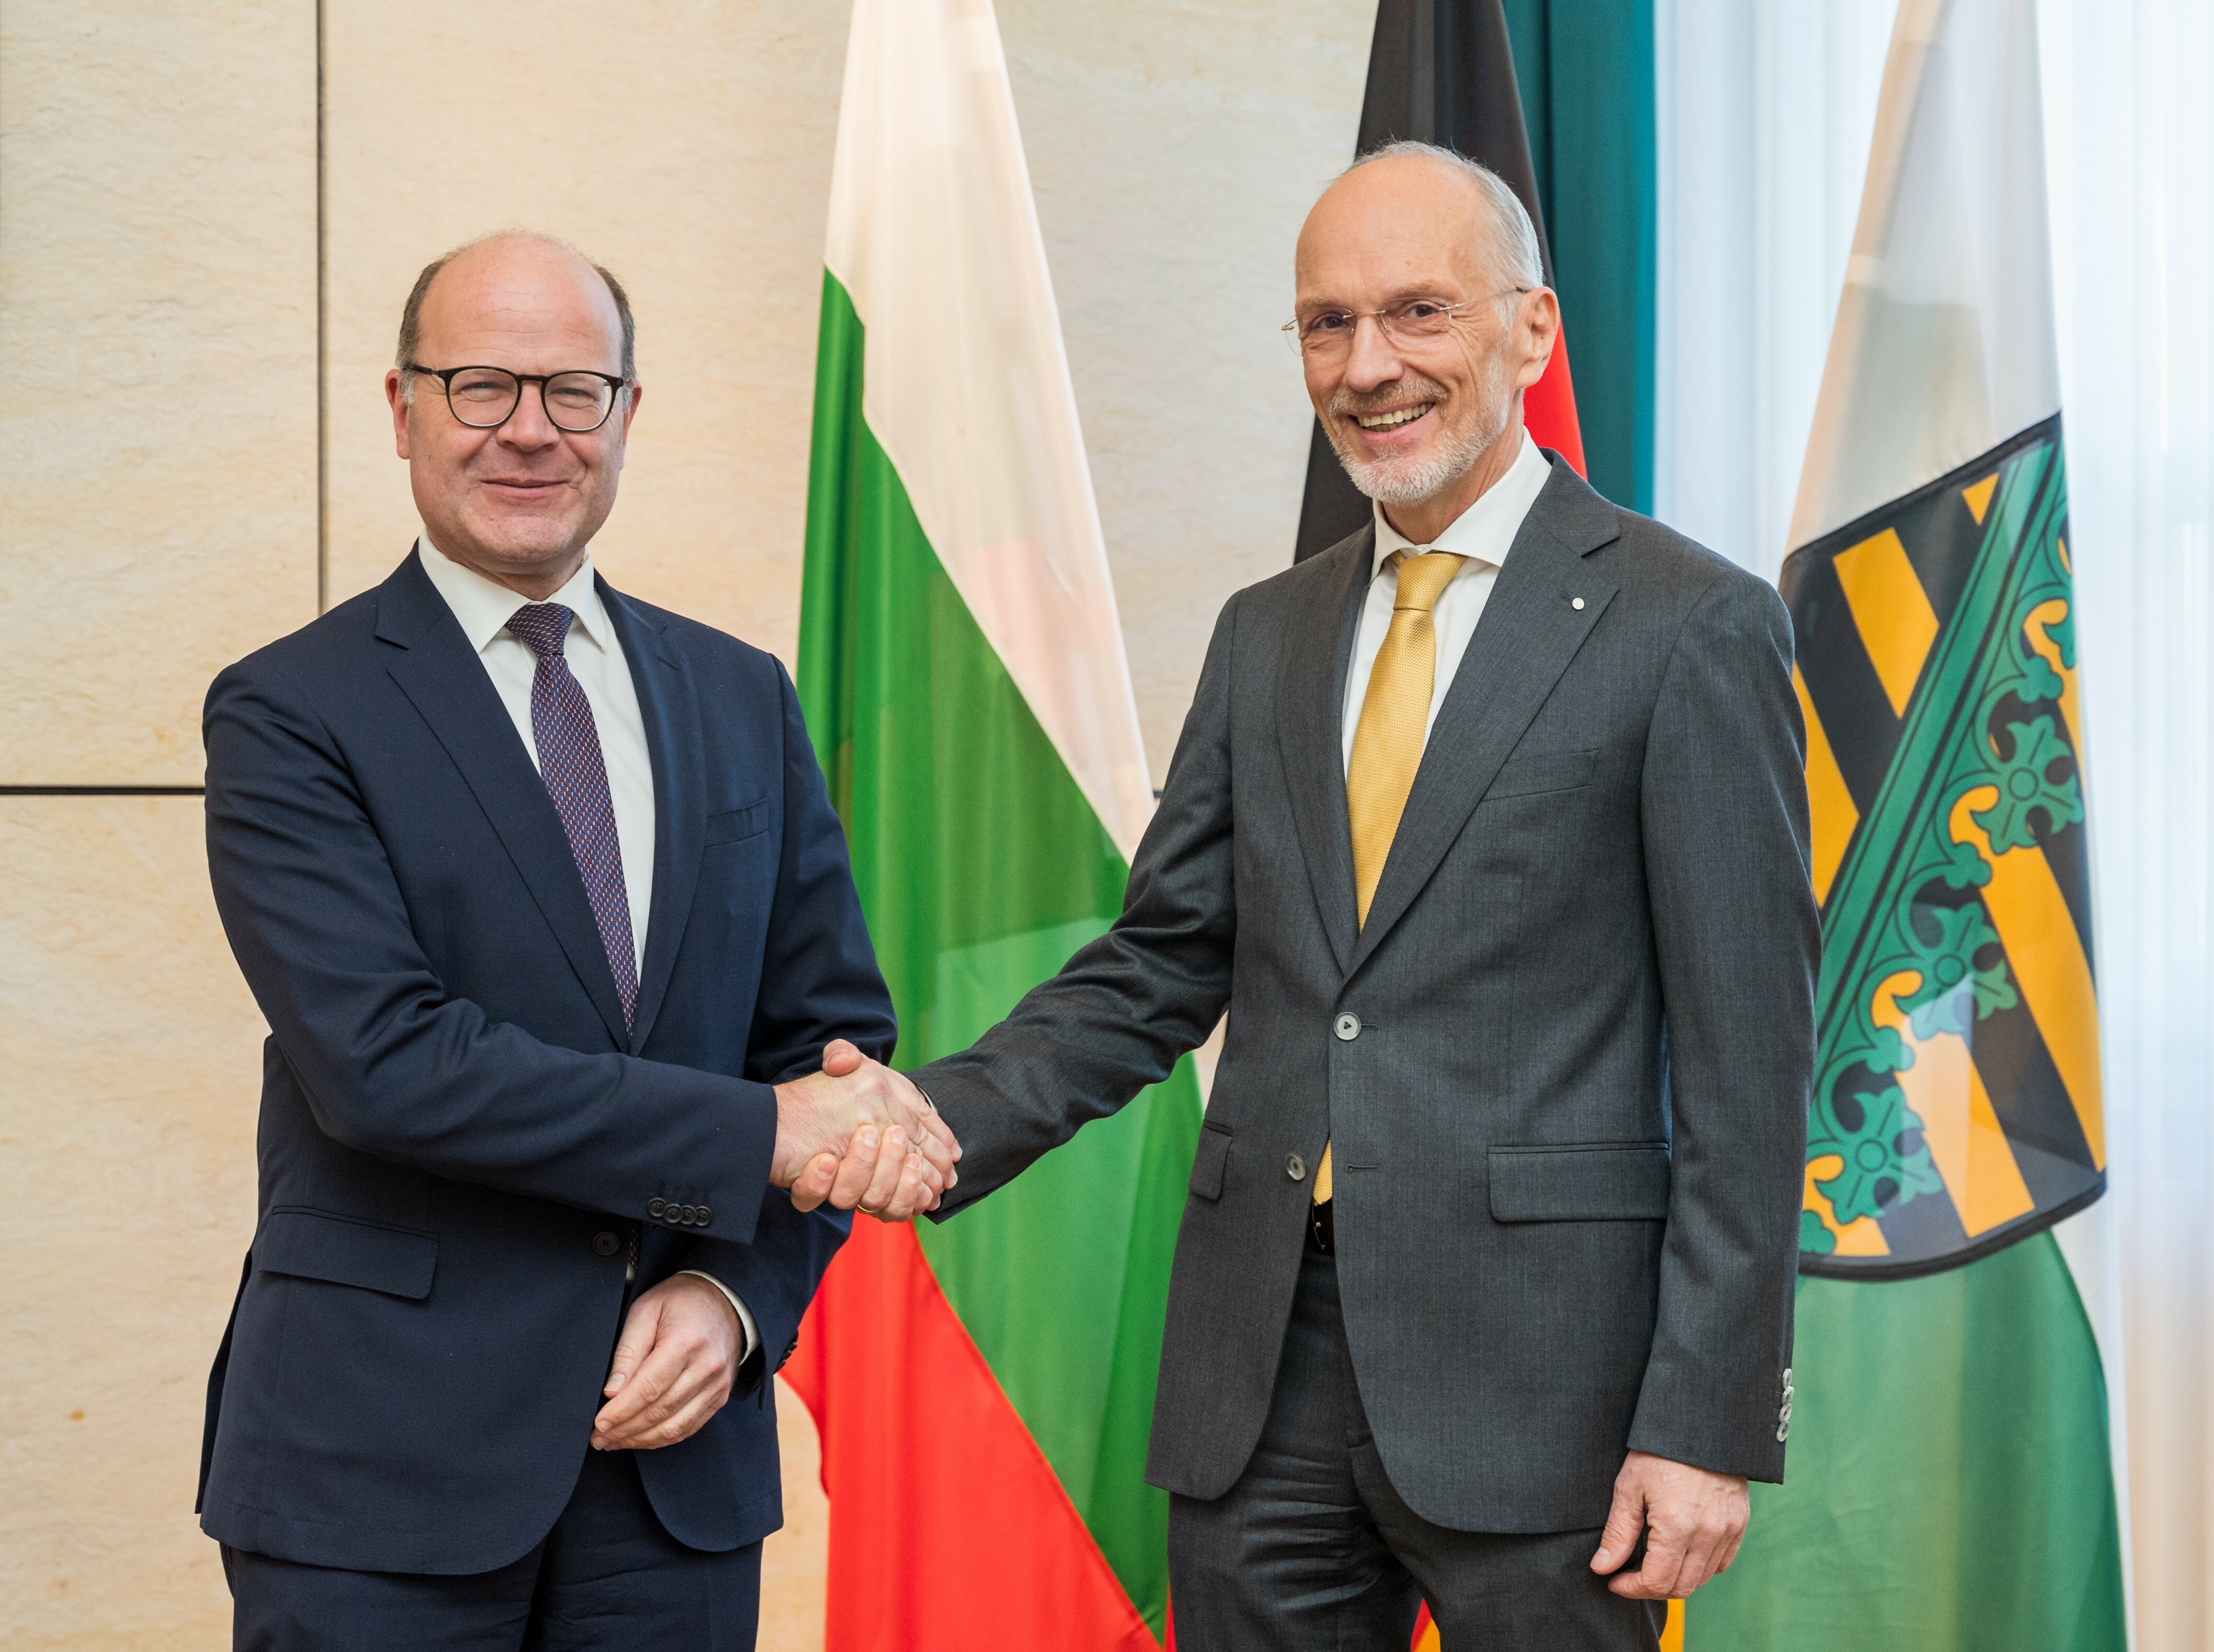 From left to right: Chief of the State Chancellery and State Minister for Federal Affairs and Media Oliver Schenk and Honorary Consul of the Republic of Bulgaria Dipl.-Ing. Heiko Schmidt, Source: State Chancellery of Saxony